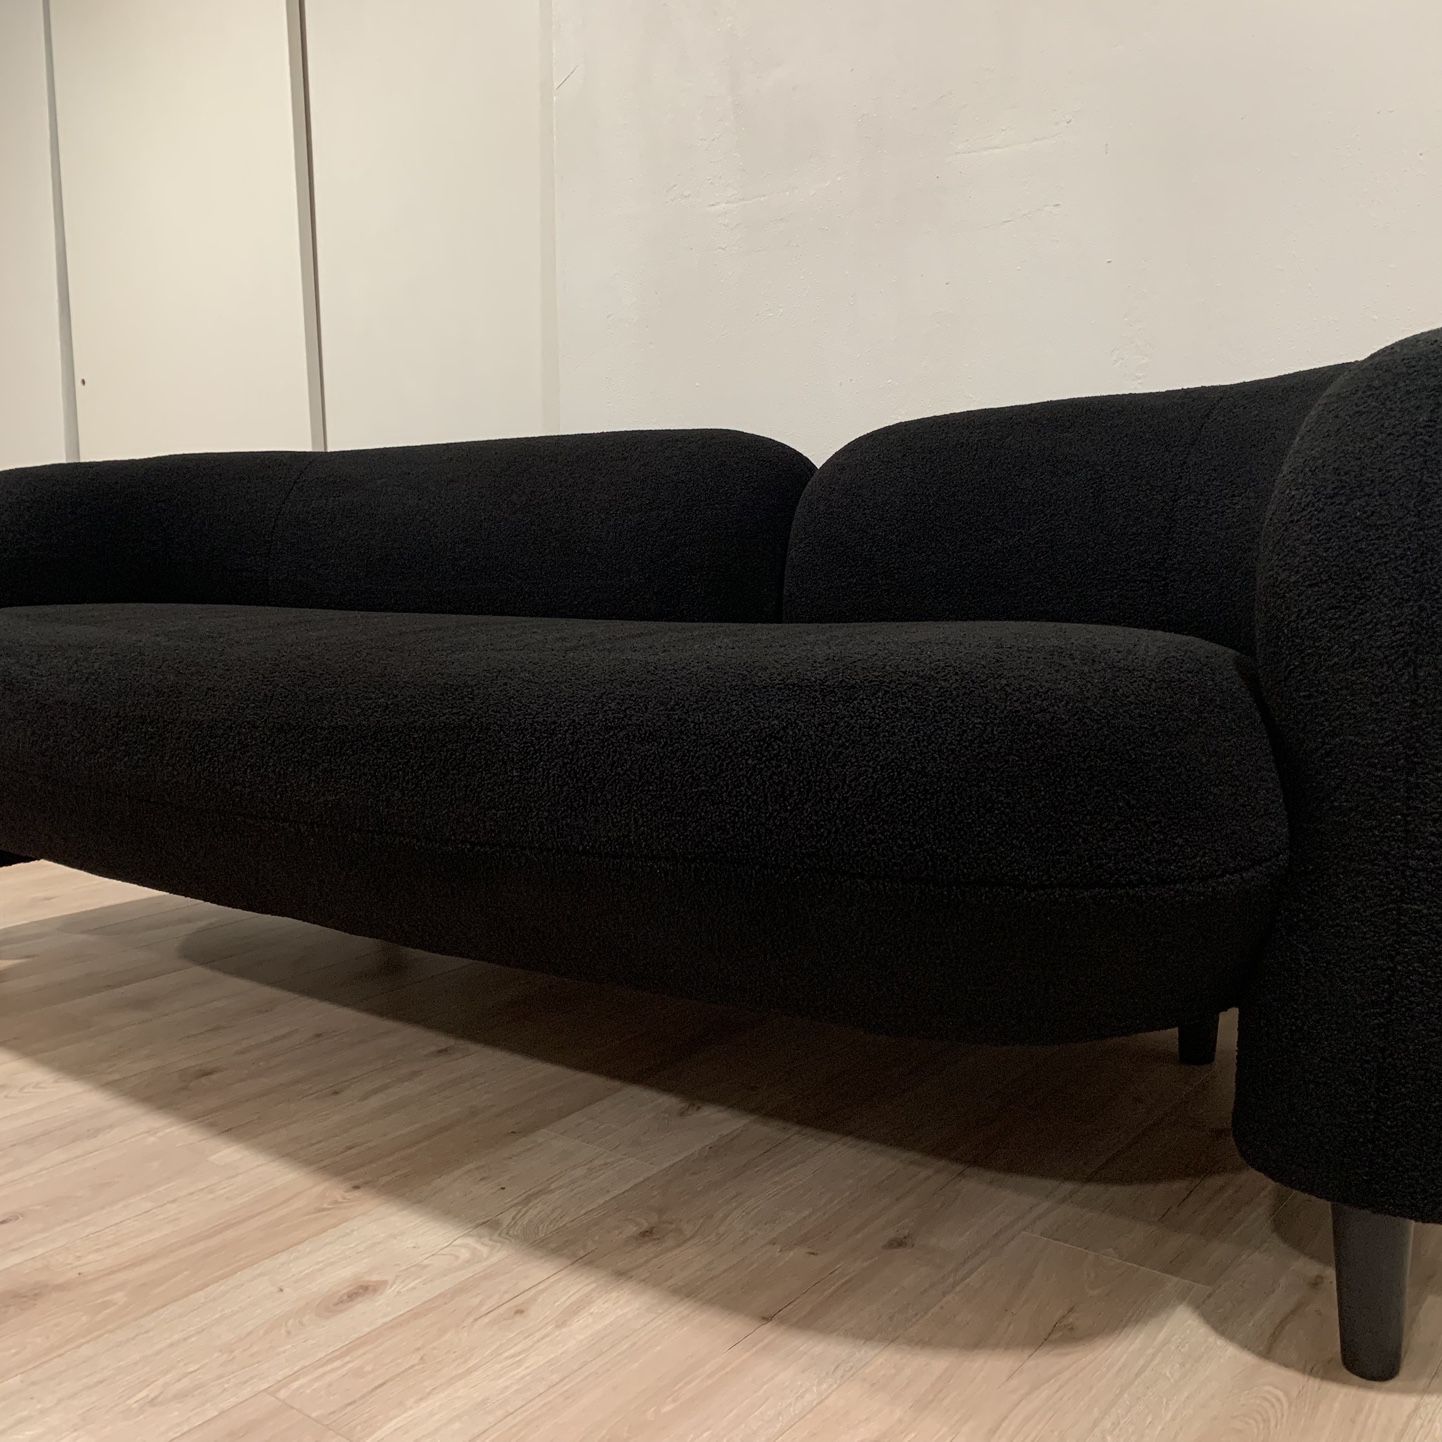 FREE DELIVERY 🚚 Like New Contemporary Modern Sofa Couch